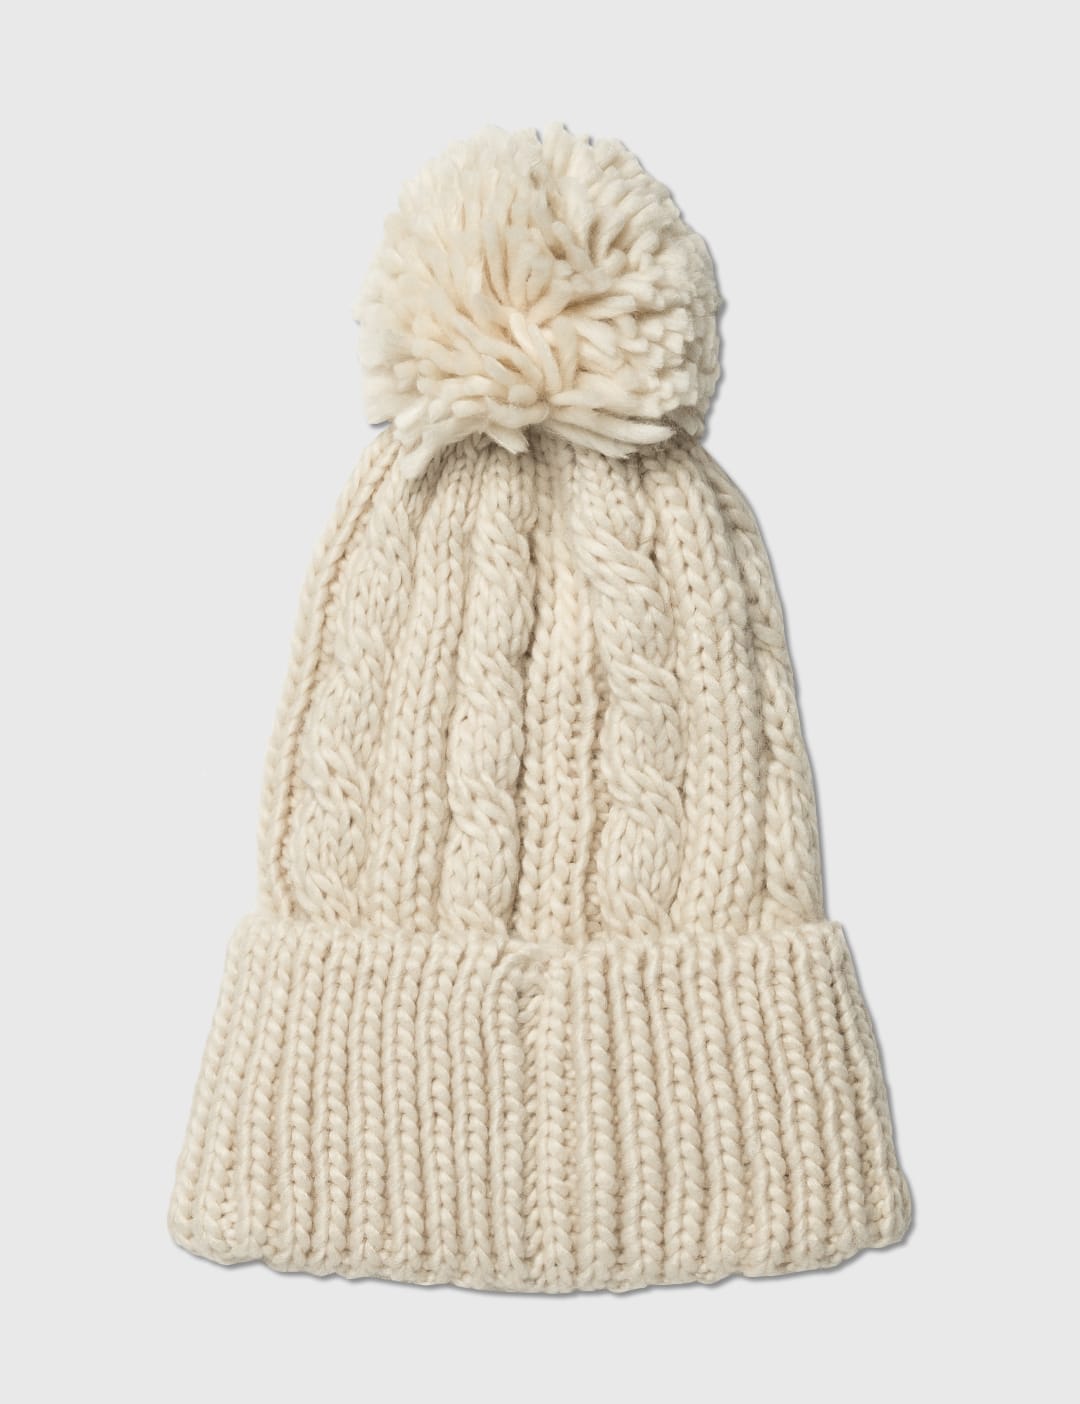 Human Made - Cable Pop Beanie | HBX - Globally Curated Fashion and